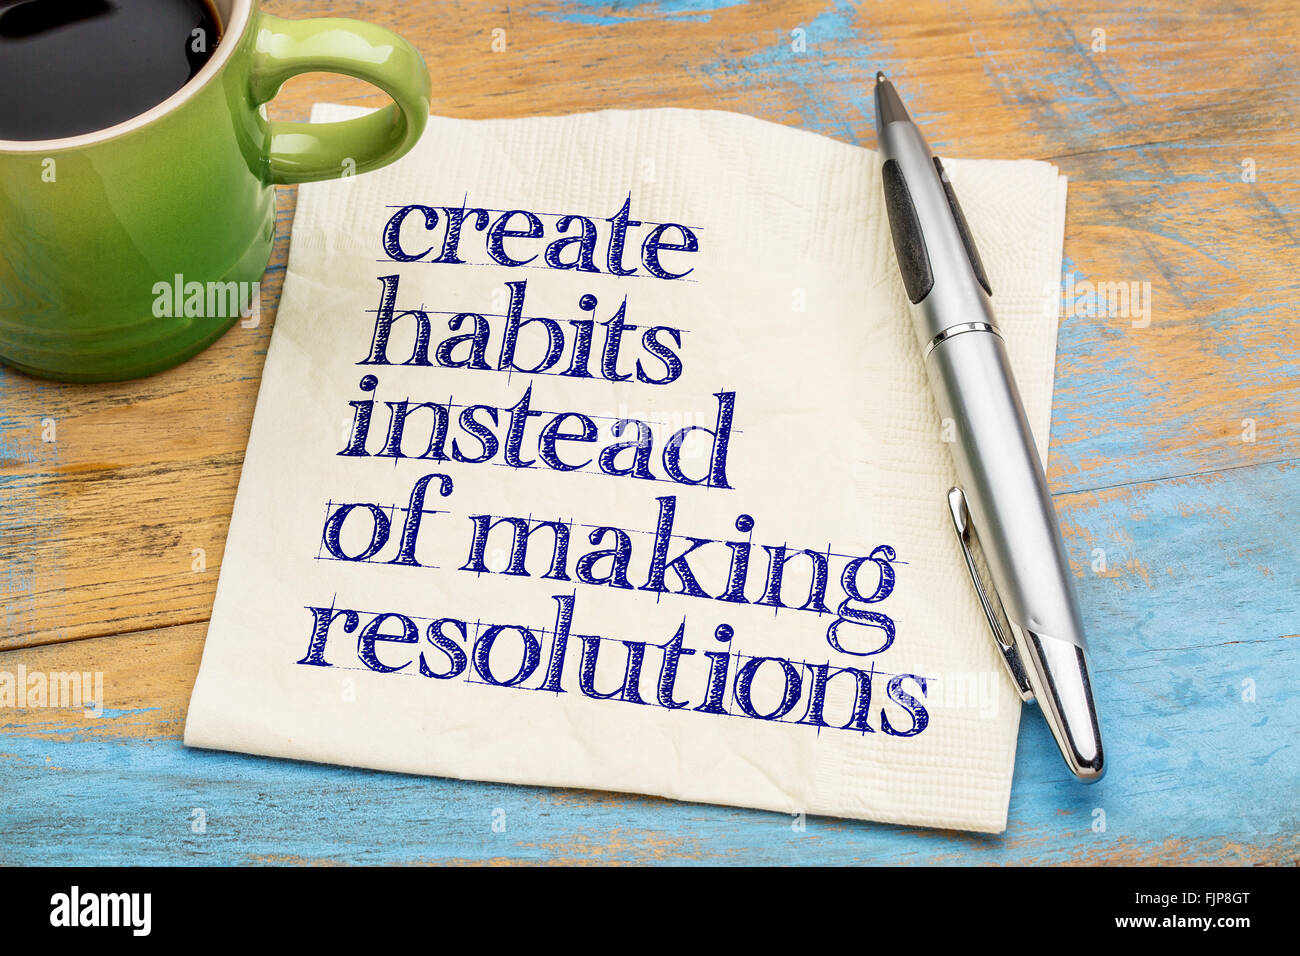 create habits instead of resolutions - motivational advice or reminder on a napkin with a cup of coffee Stock Photo